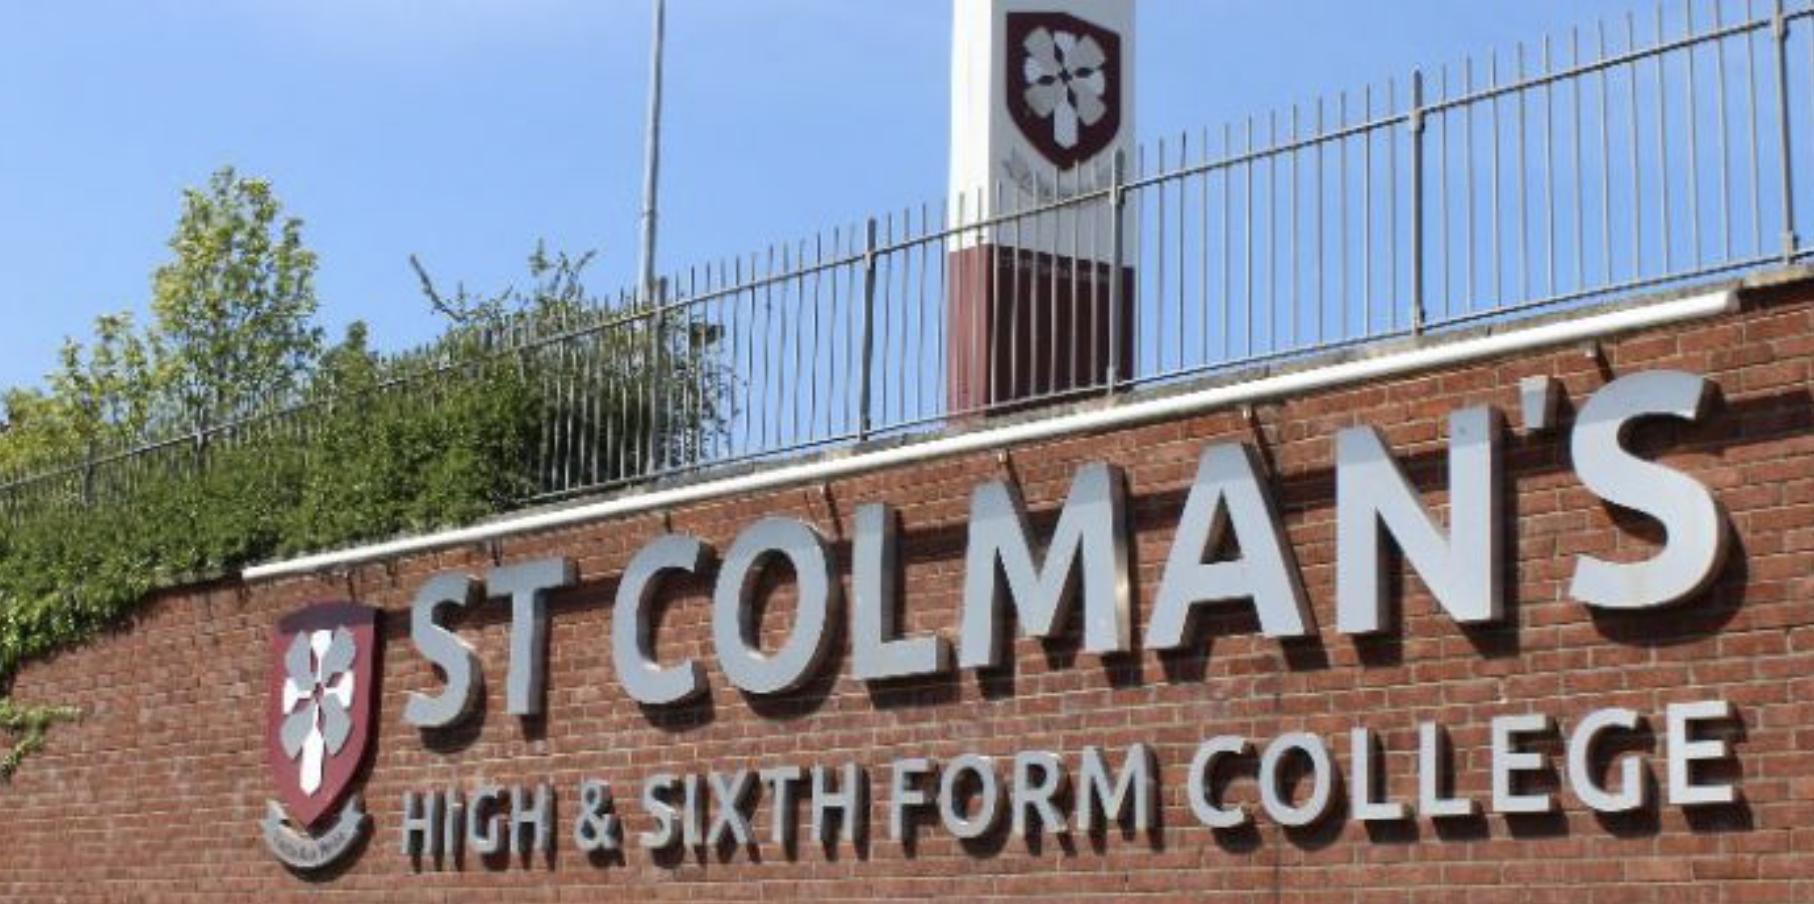 St Colman’s High & Sixth Form College